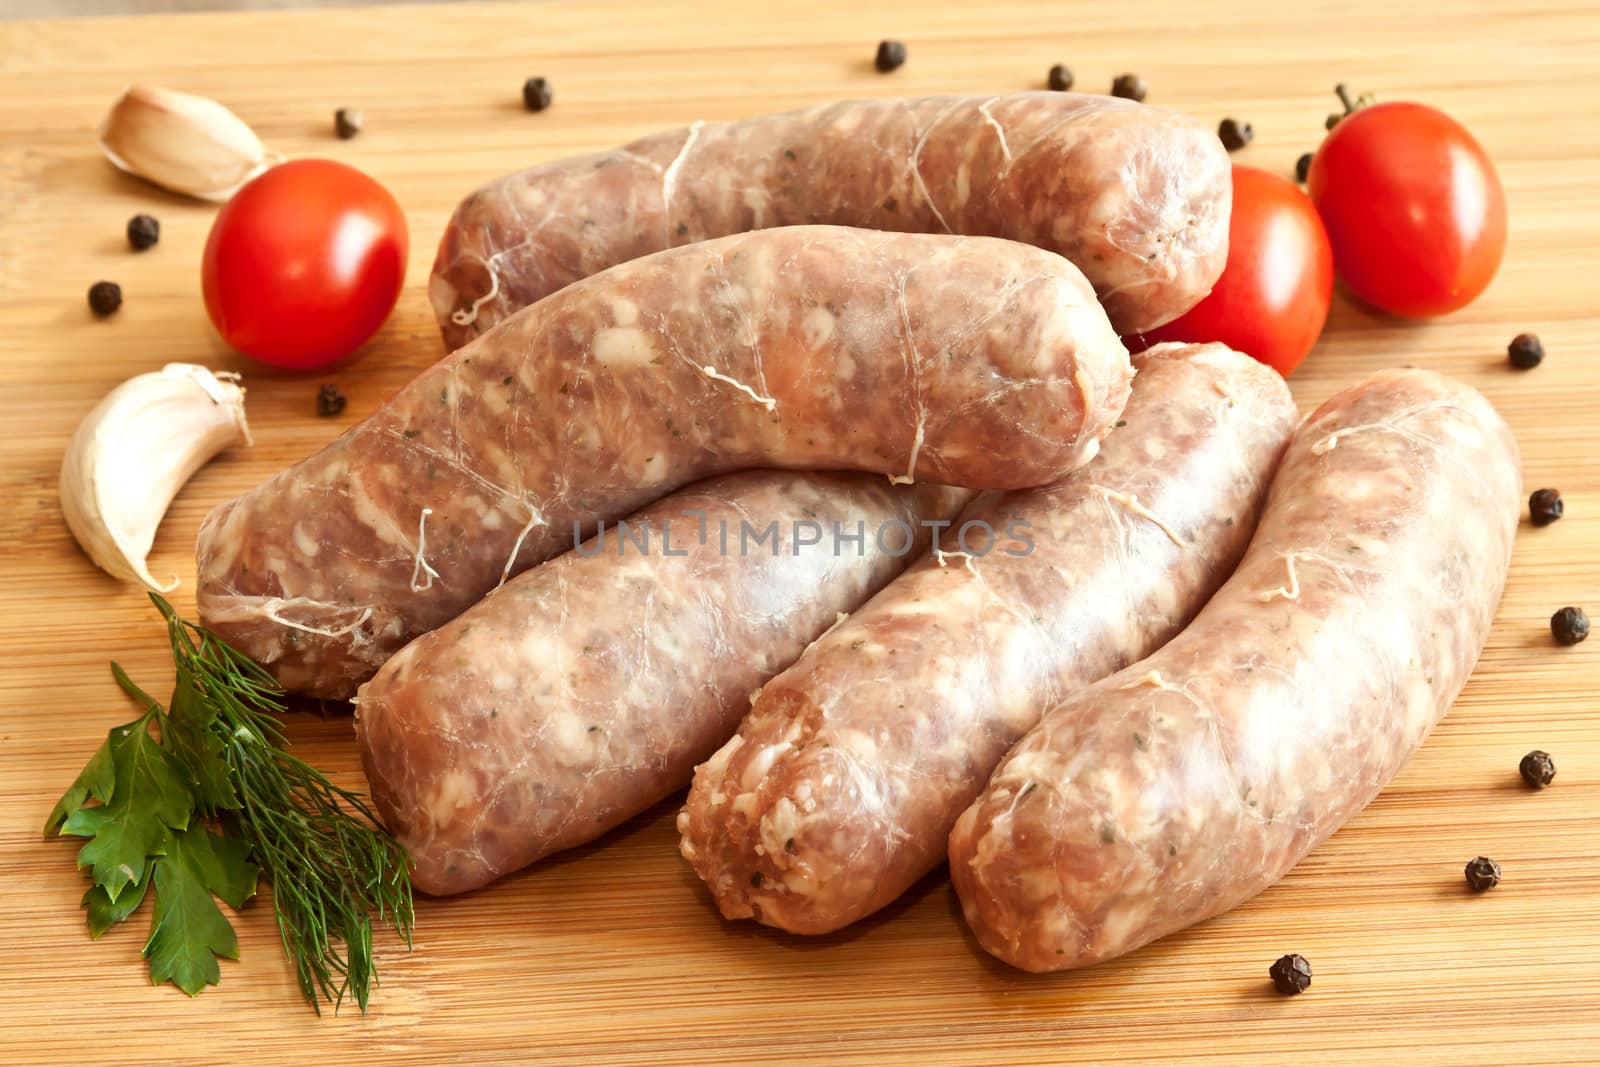 Uncooked sausages with vegetables on the chopping board
